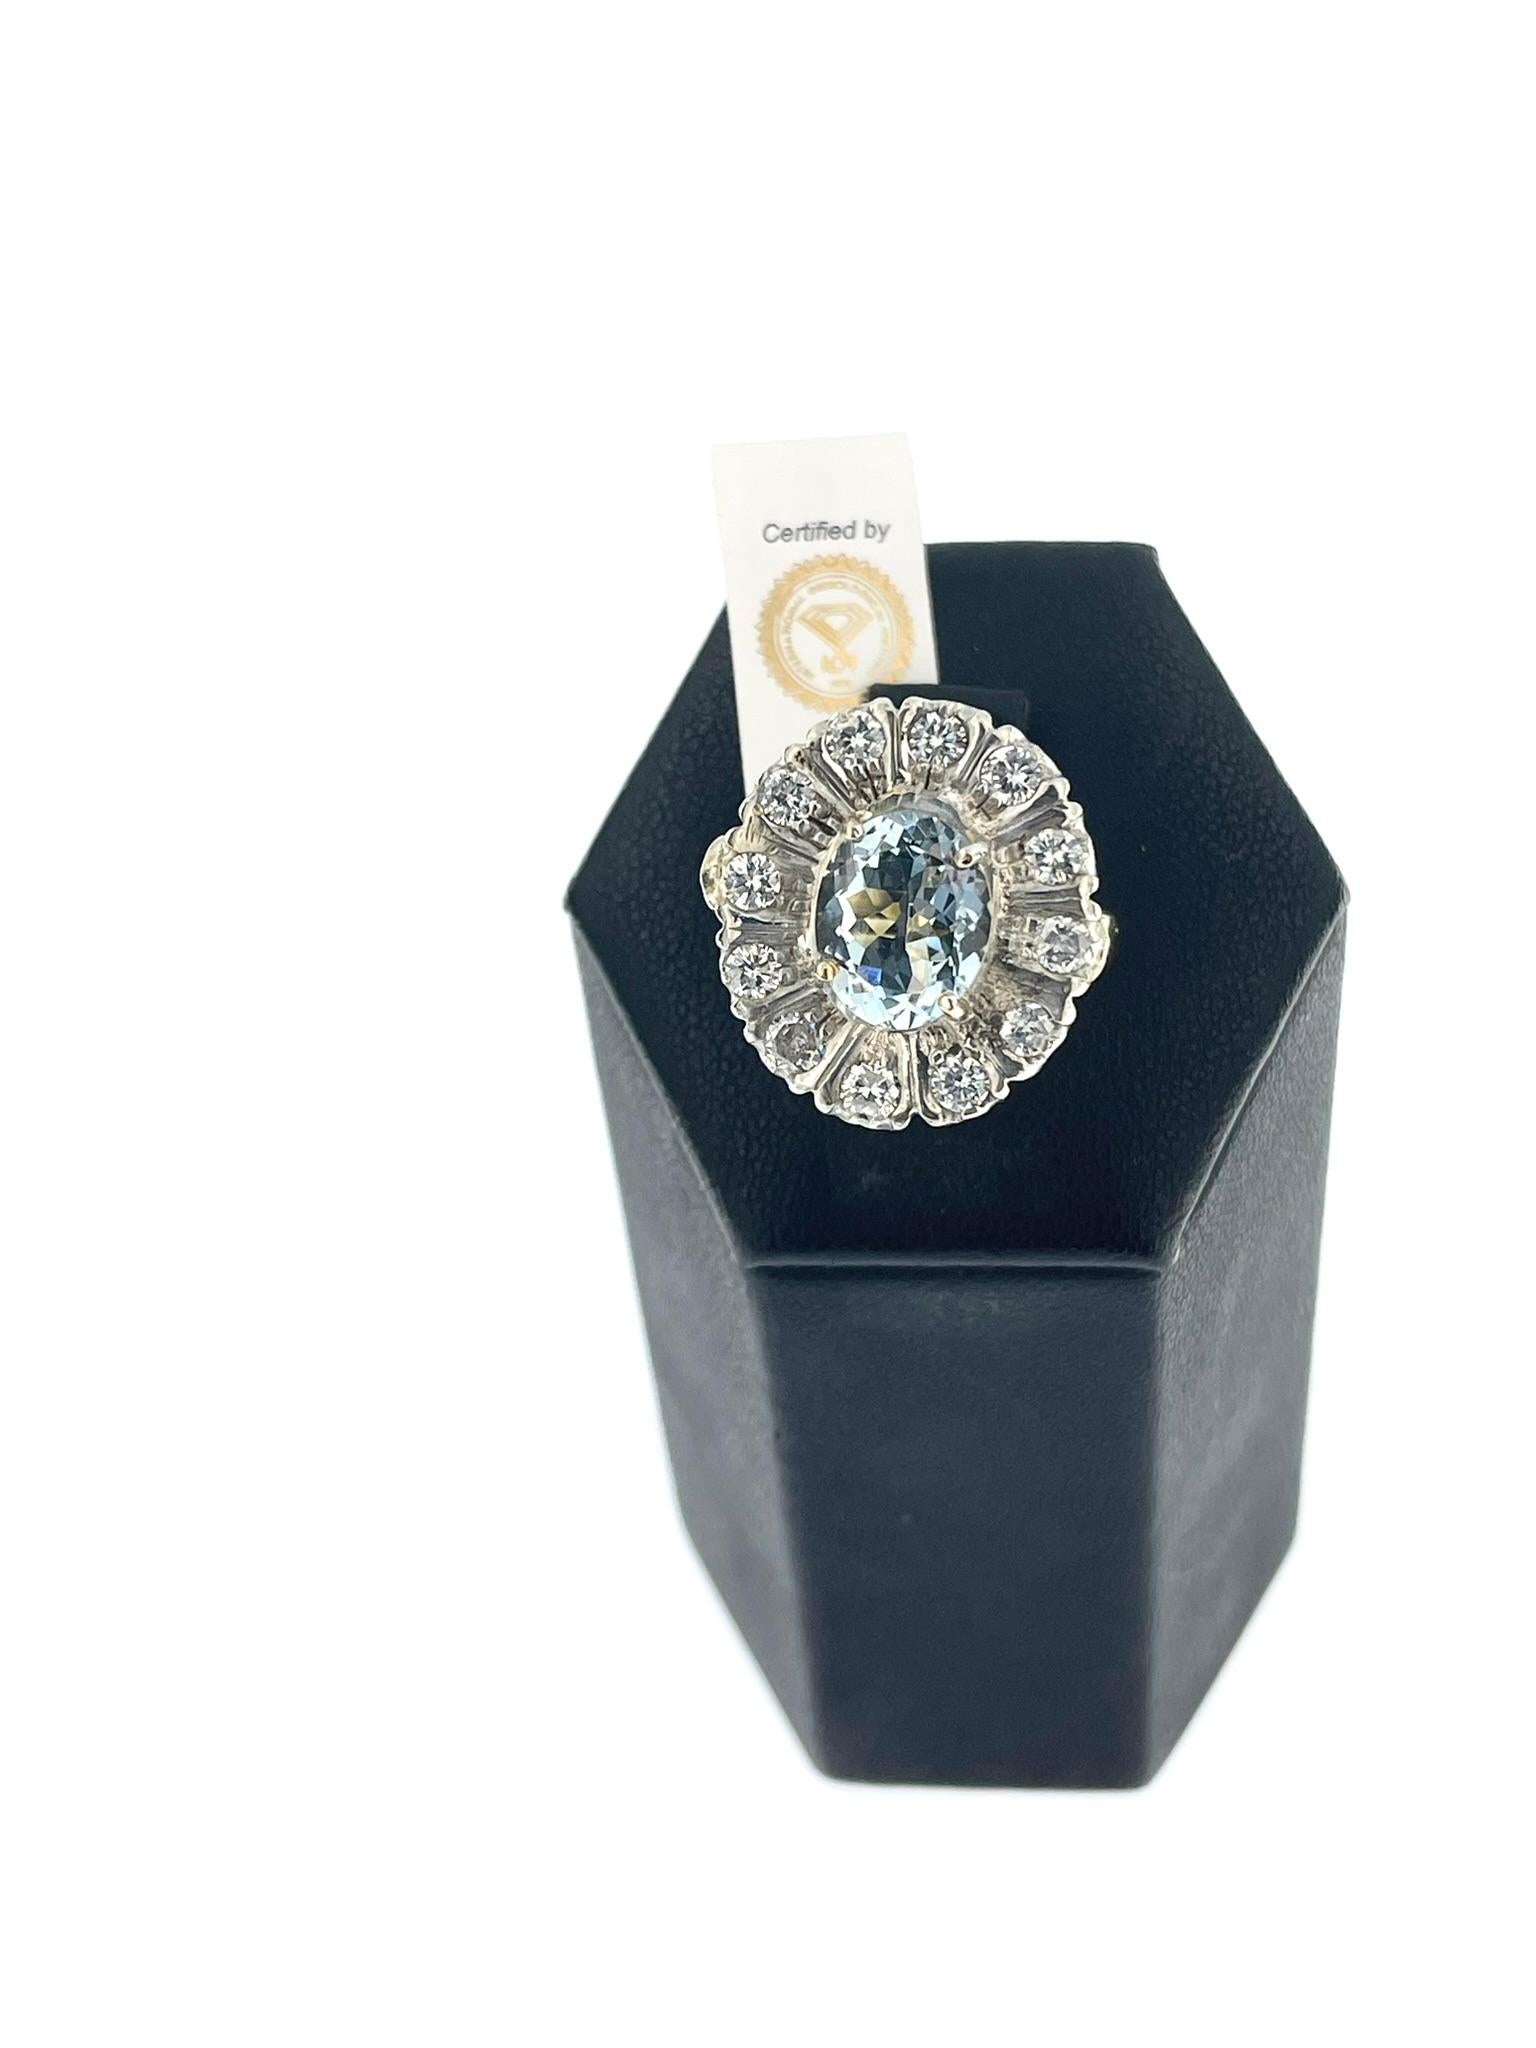 This antique aquamarine and diamonds ring is a true testament to timeless elegance and craftsmanship. With a blend of yellow gold and silver, it offers a unique and striking contrast that adds to its charm.

At the center of the ring sits a